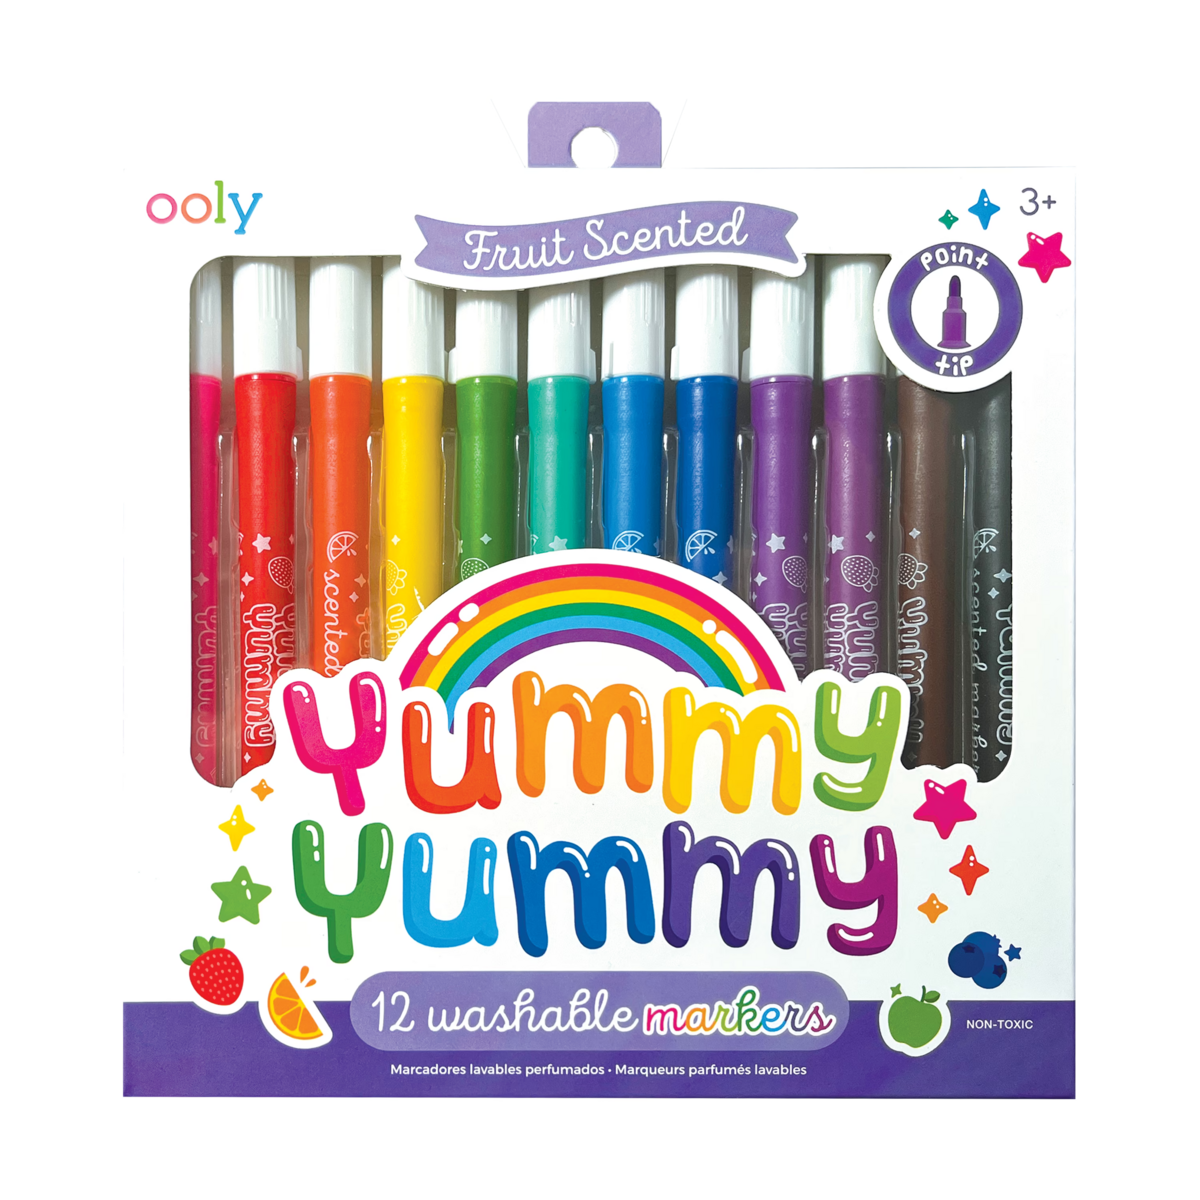 OOLY Yummy Yummy Scented Markers in packaging